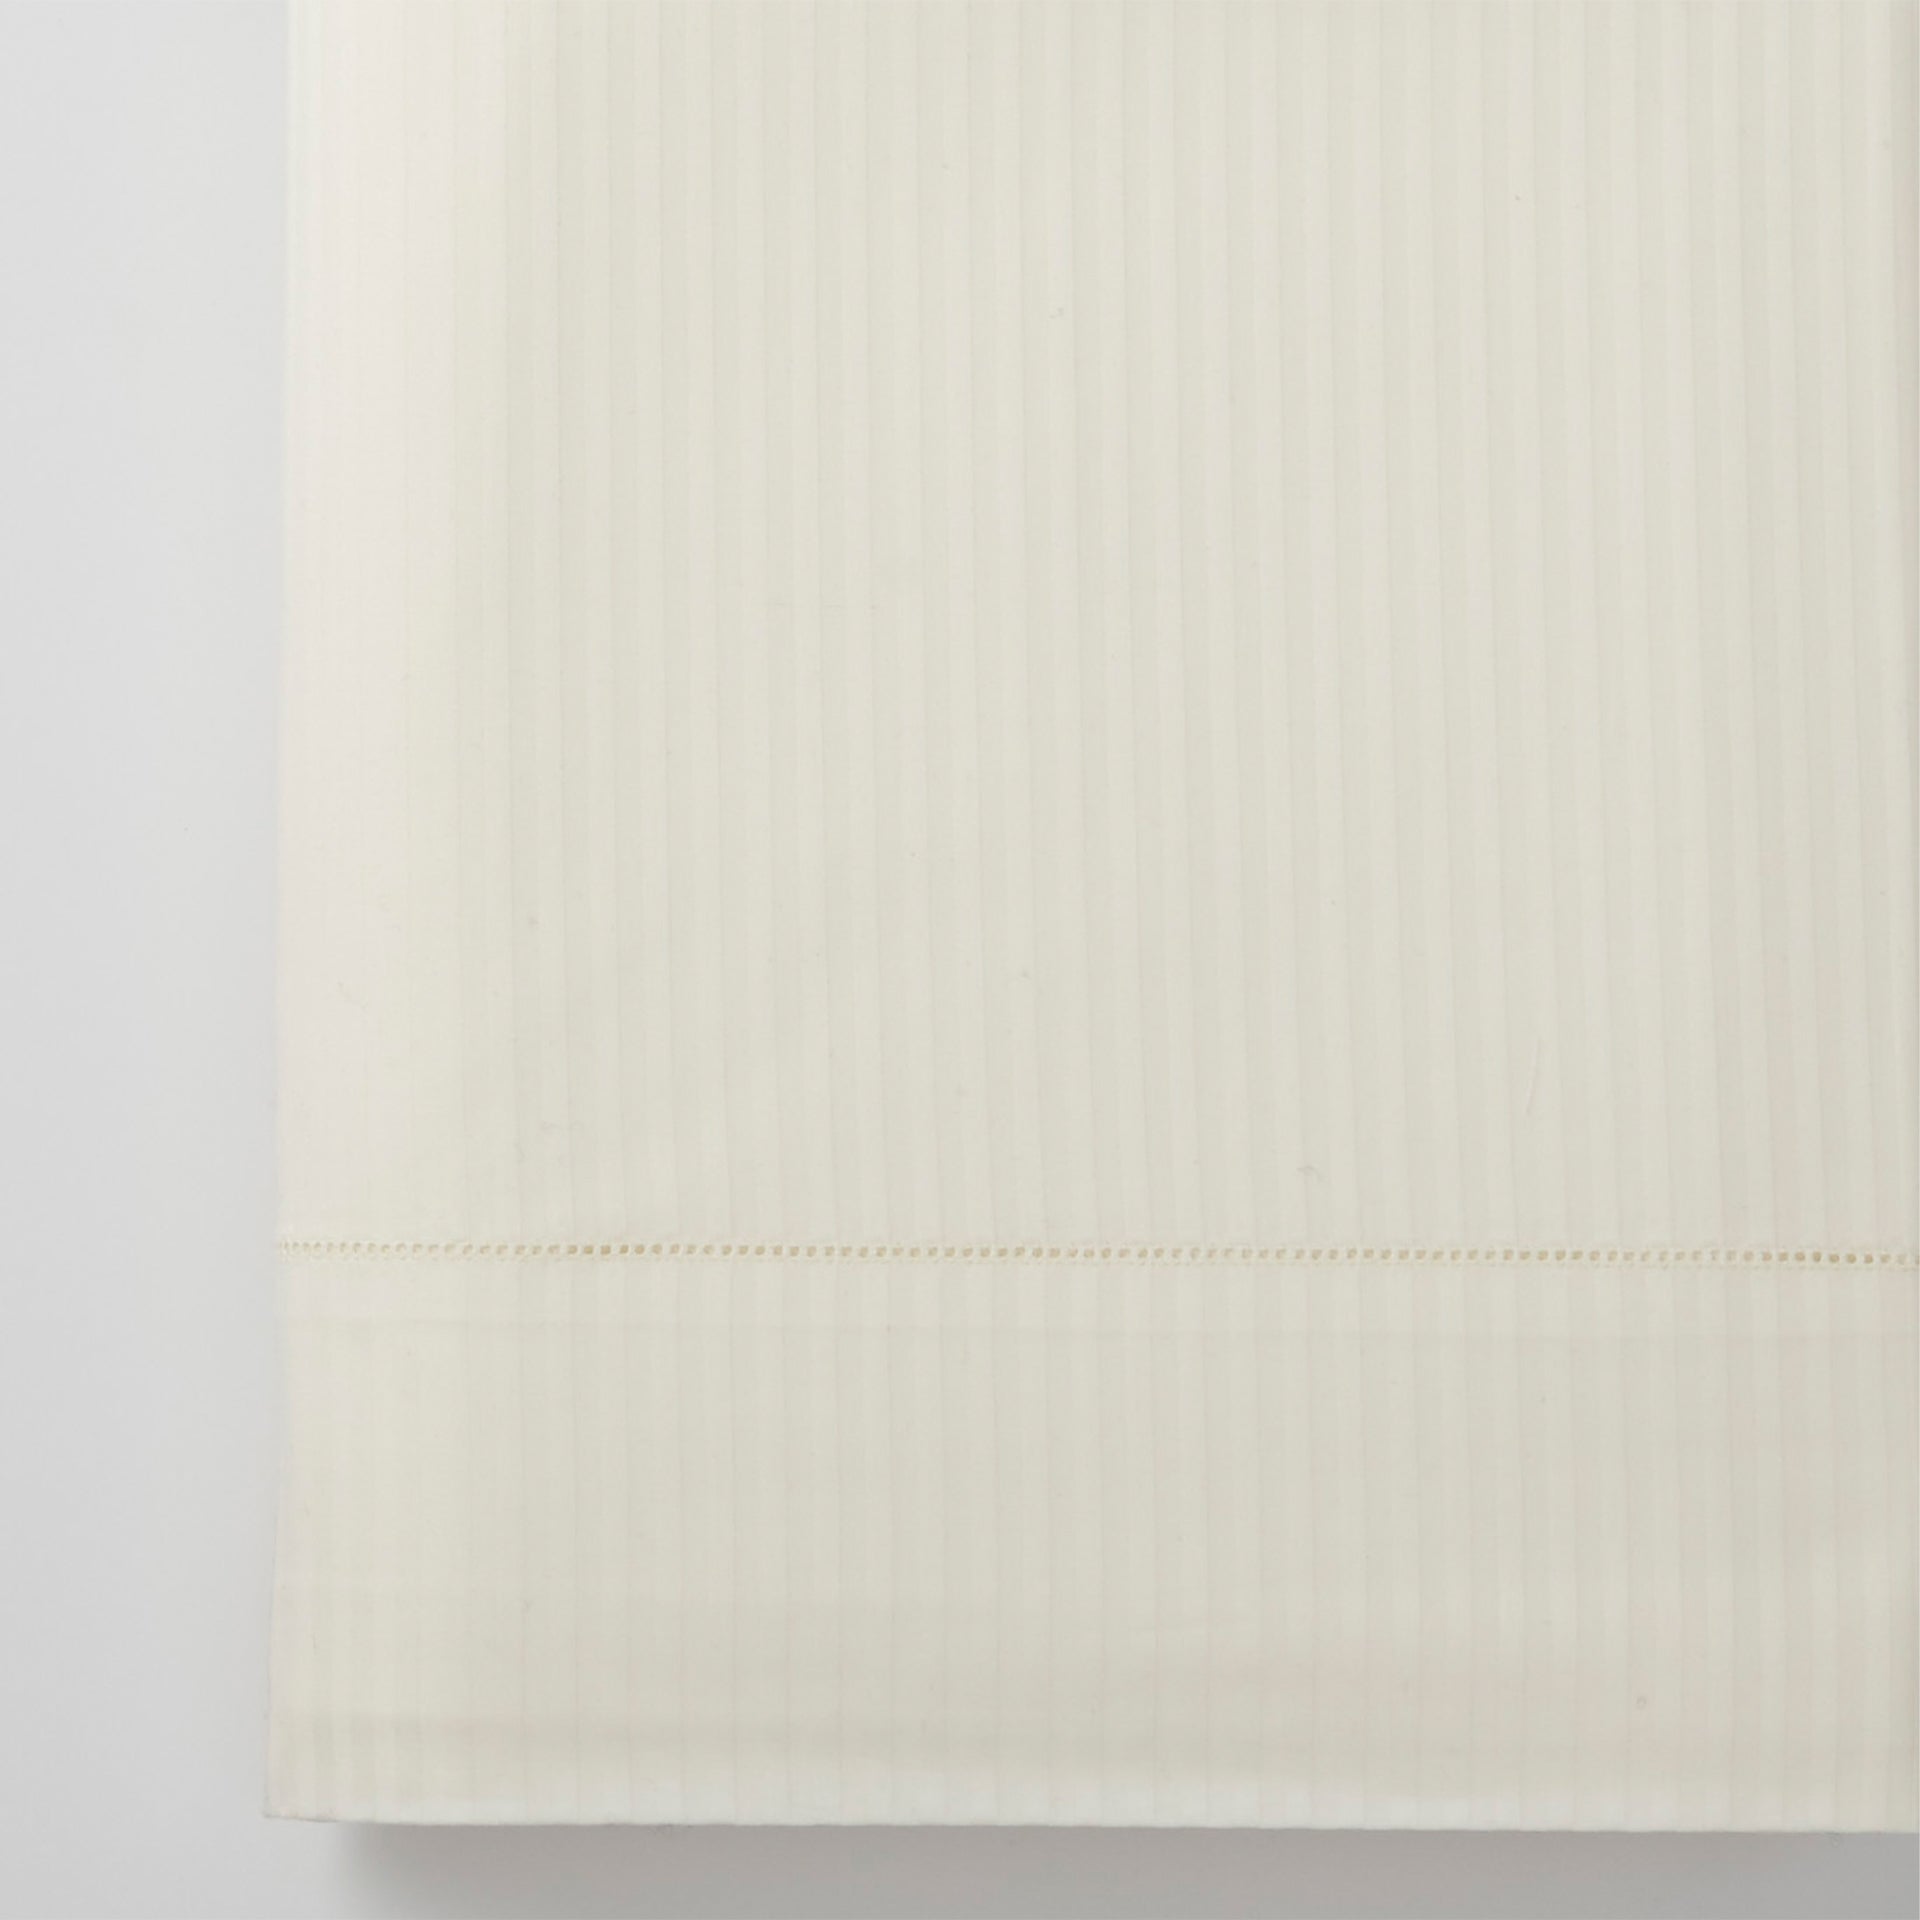 savoia stripe sateen detail in the color ivory, 